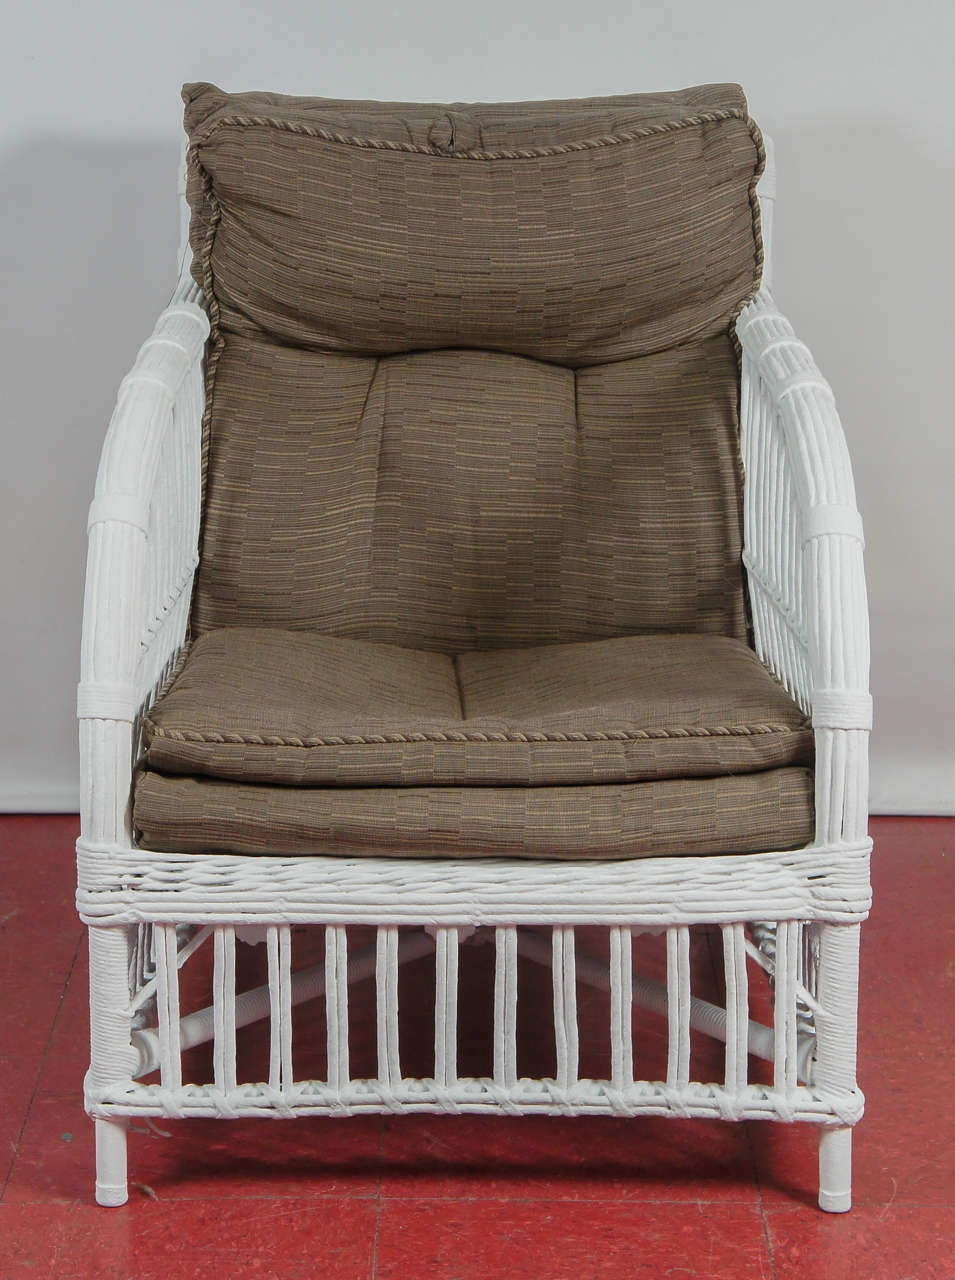 This armed rattan, split reed and wicker chair advertises deep-seated comfort.
Back, 30.25